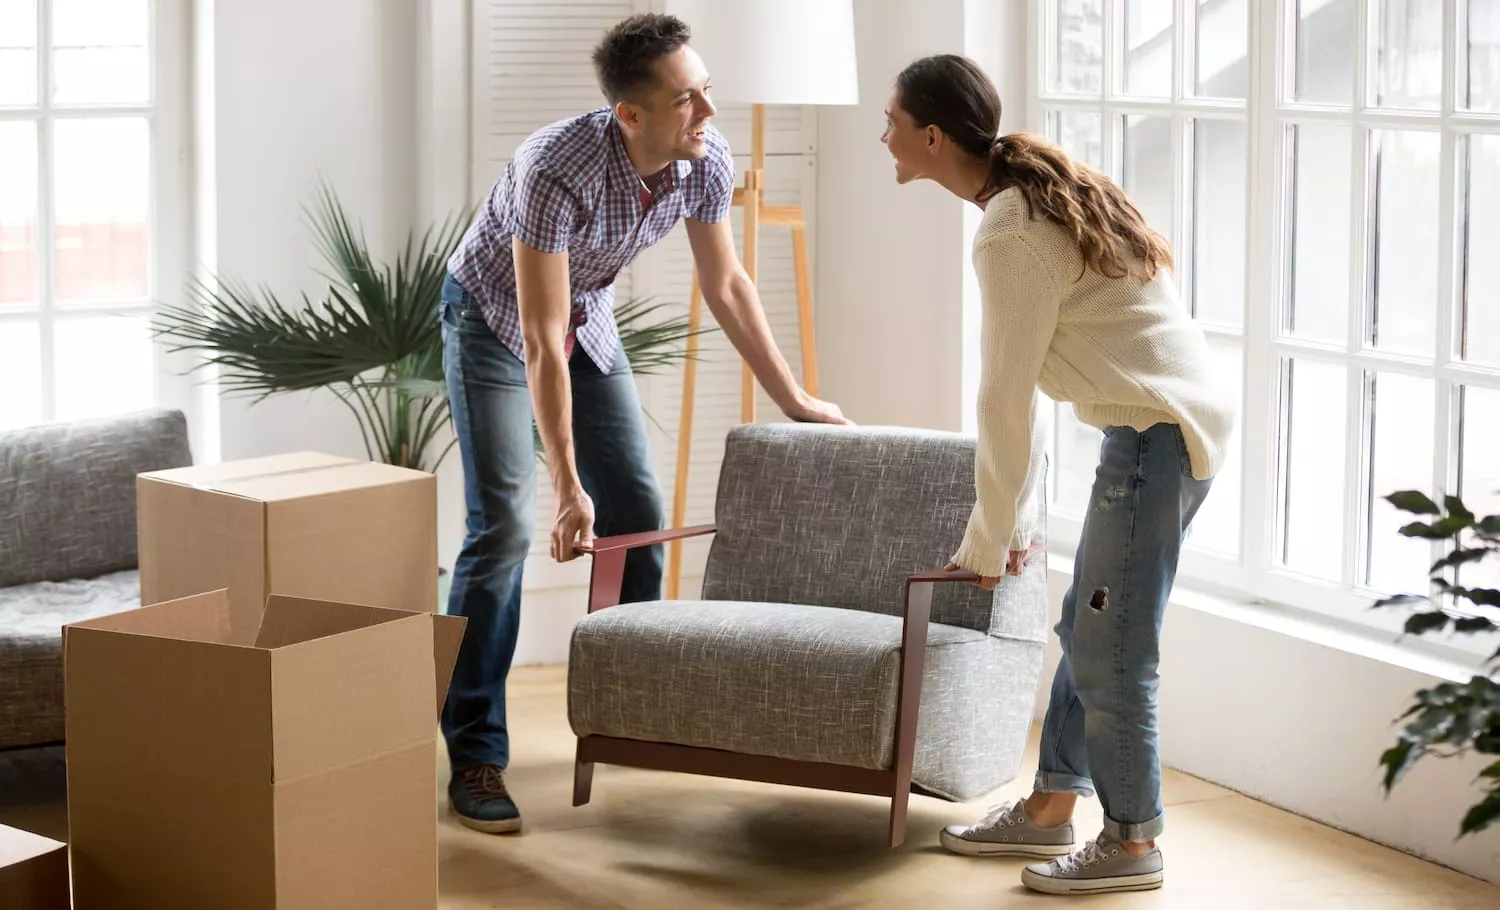 %name Why Hiring a Professional Organizer is a MUST When Planning Your Move